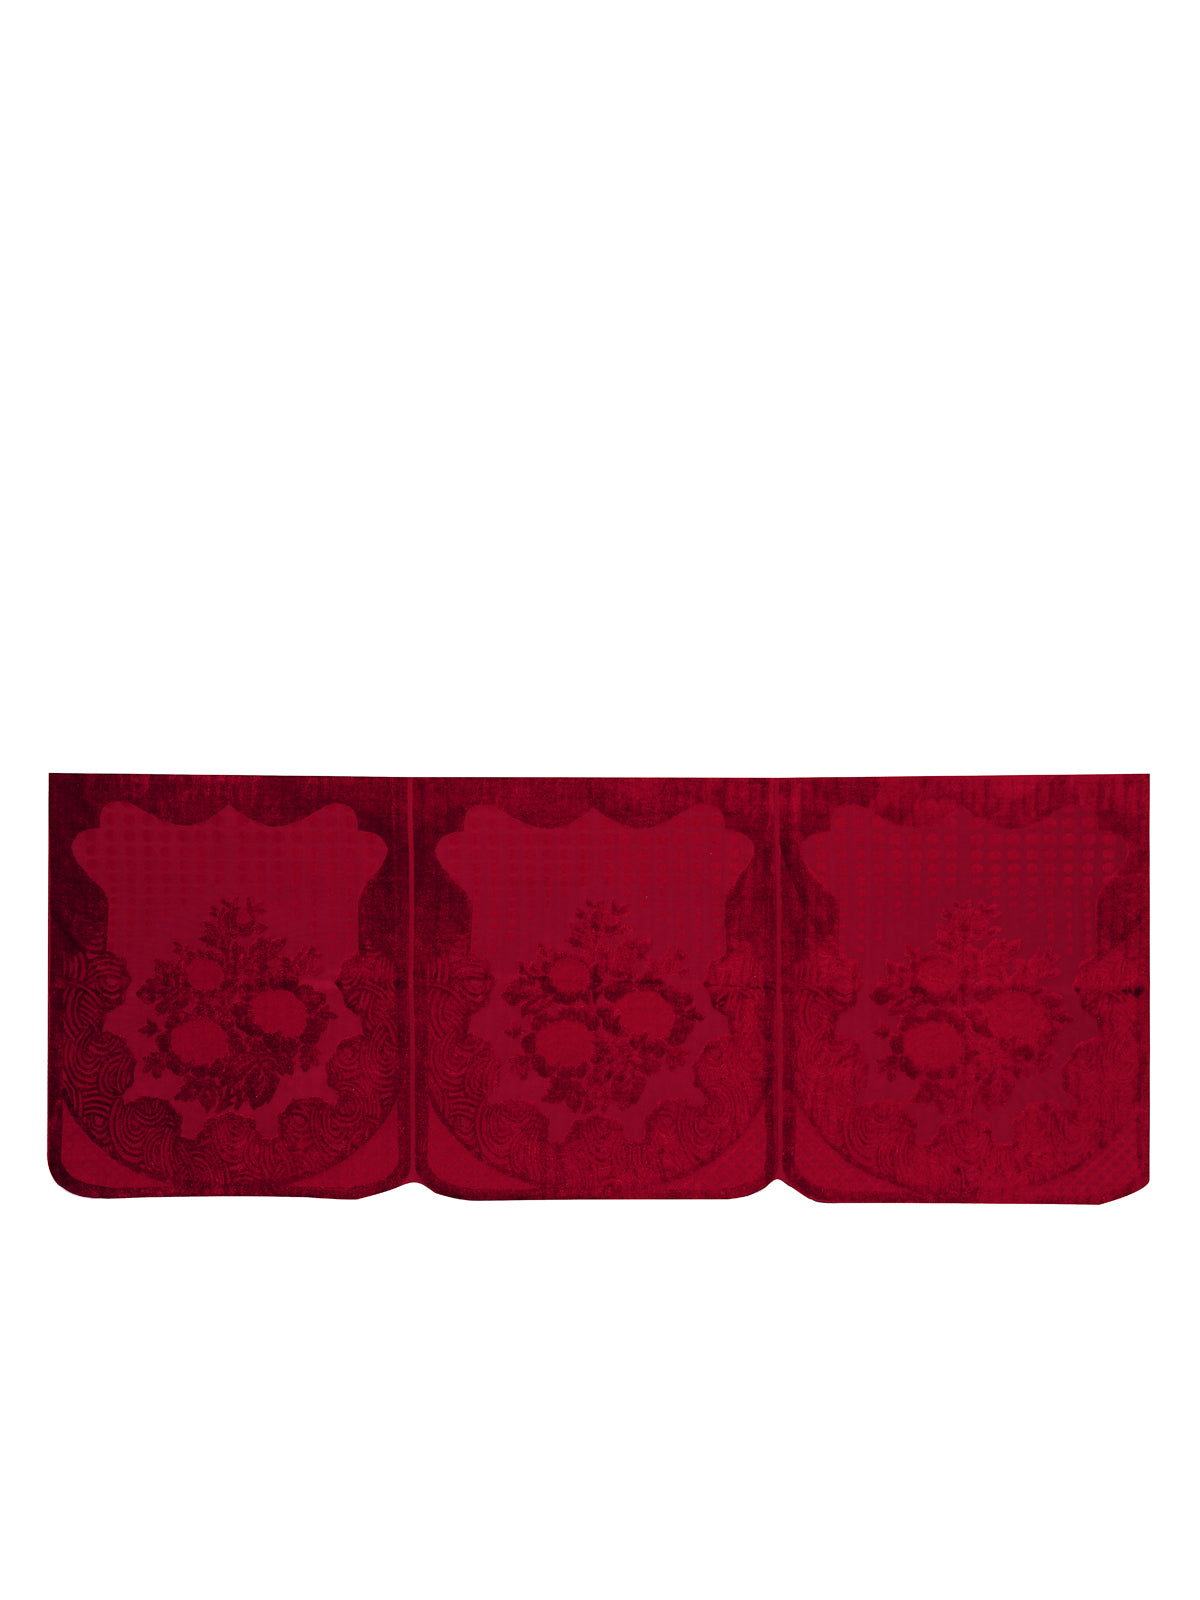 Maroon Floral Patterned 5 Seater Sofa Cover Set